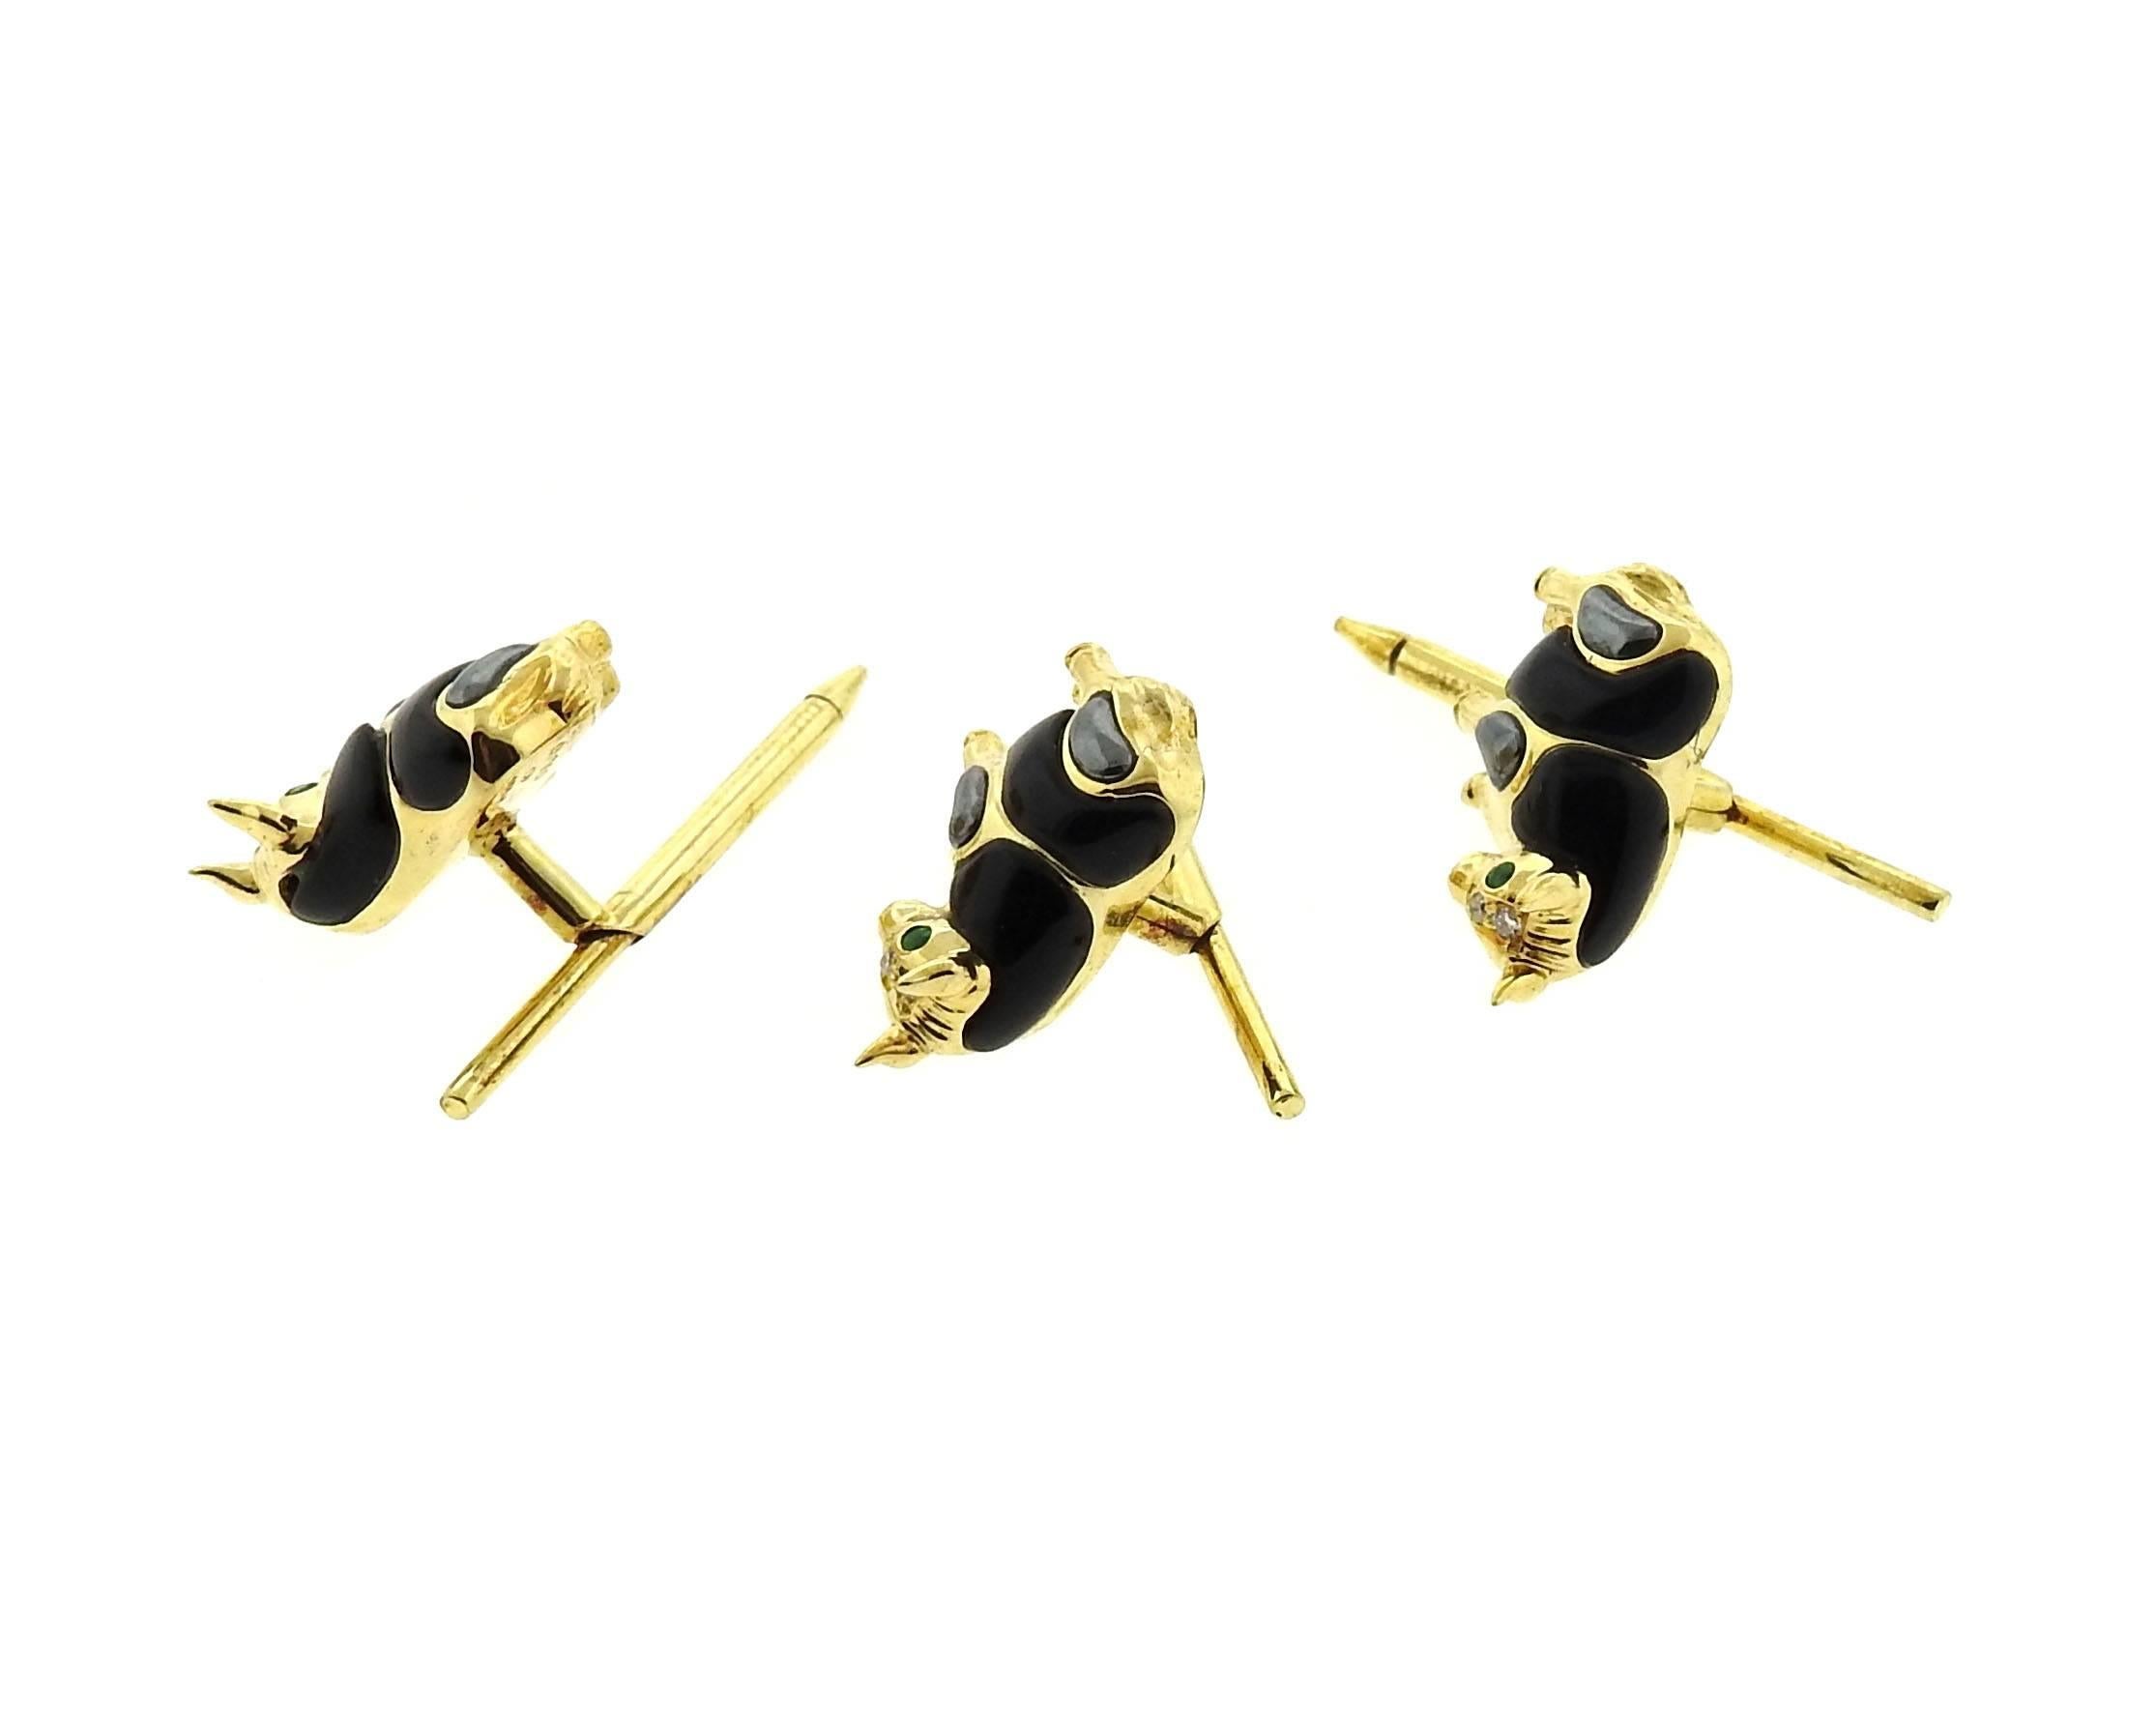 Exquisite 14k yellow gold cufflinks and studs set, crafted by Asch Grossbardt, featuring bulls design, decorated with onyx, hemamtite, diamonds and emerald eyes.  Cufflink is 28mm x 18mm,  stud top - 13mm x 17mm . Marked: 14k Asch Grossbardt. Weight